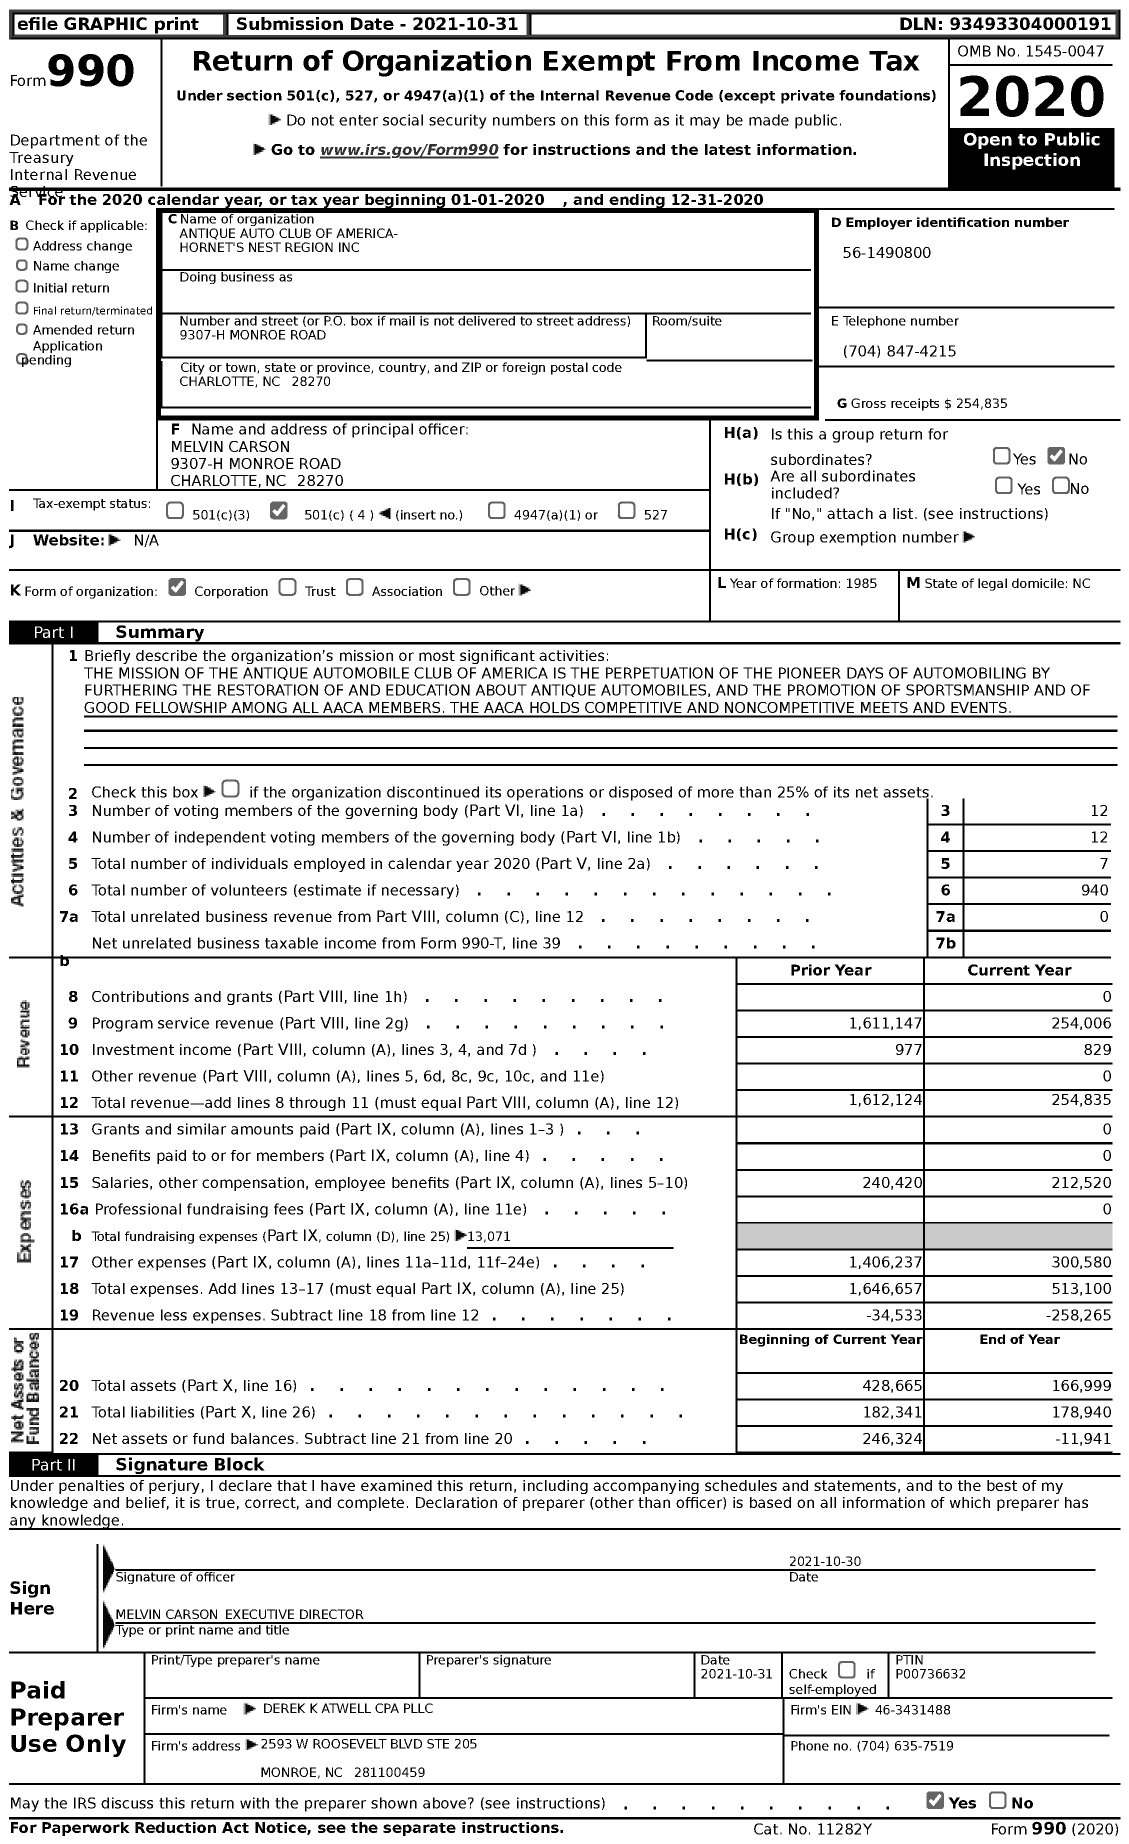 Image of first page of 2020 Form 990 for Antique Auto Club of America- Hornet's Nest Region (AACA)